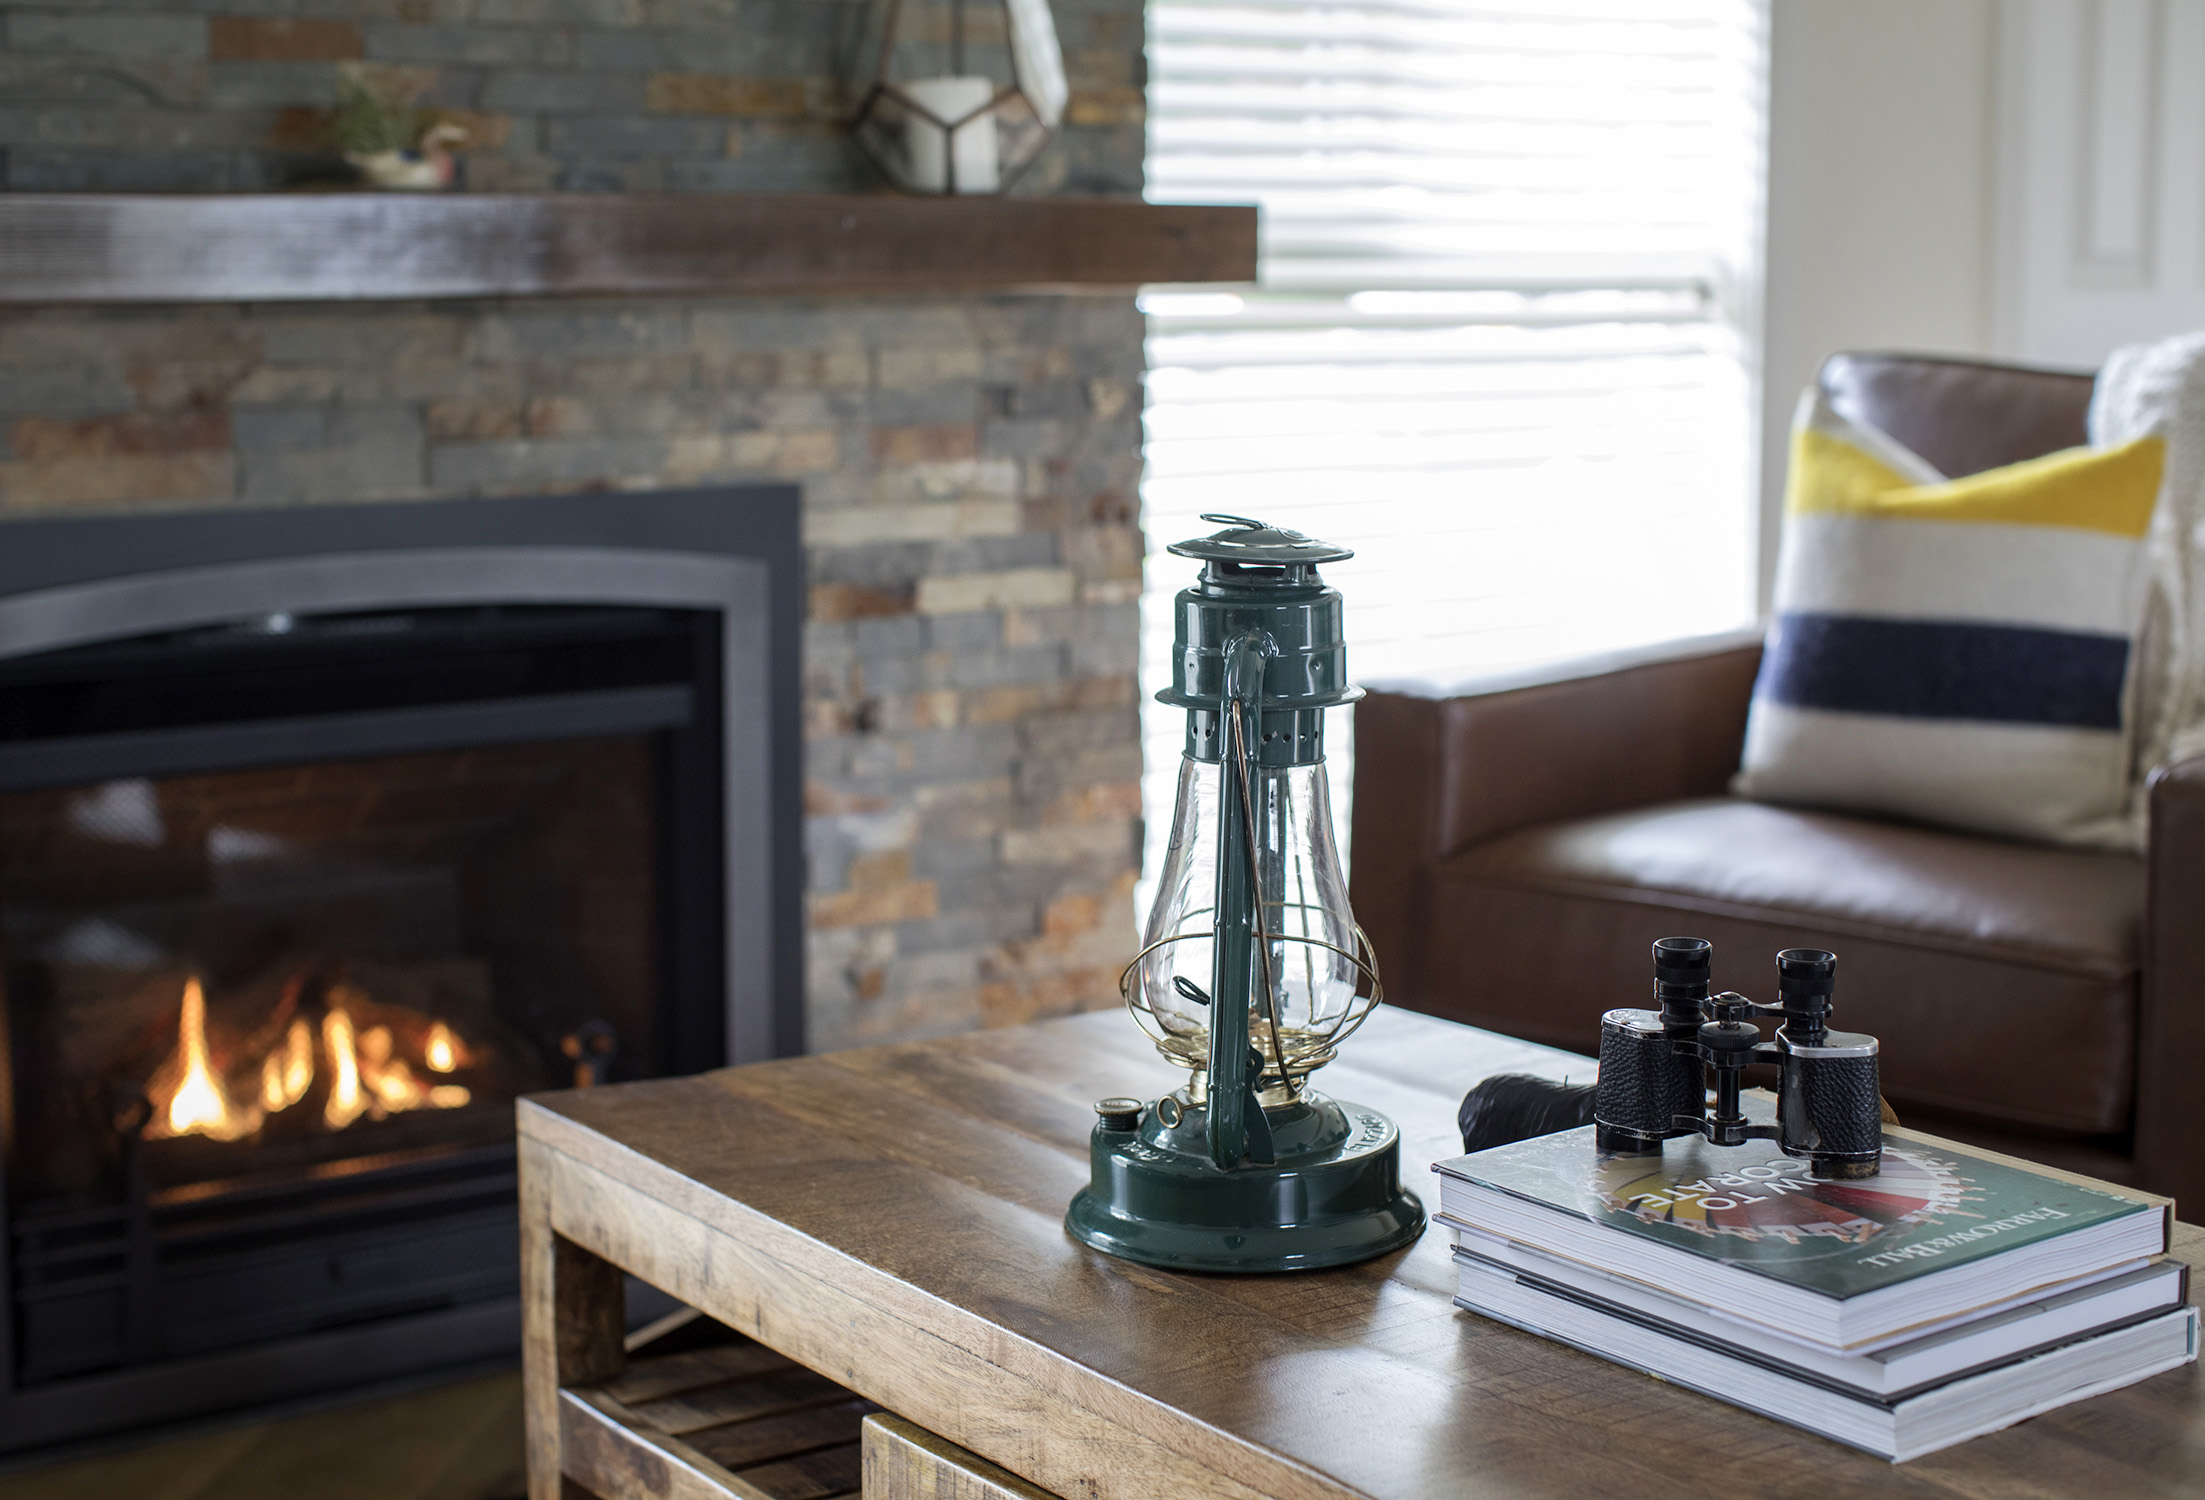 A forest green oil lamp adds to the warm, old-timey vibe of this home.